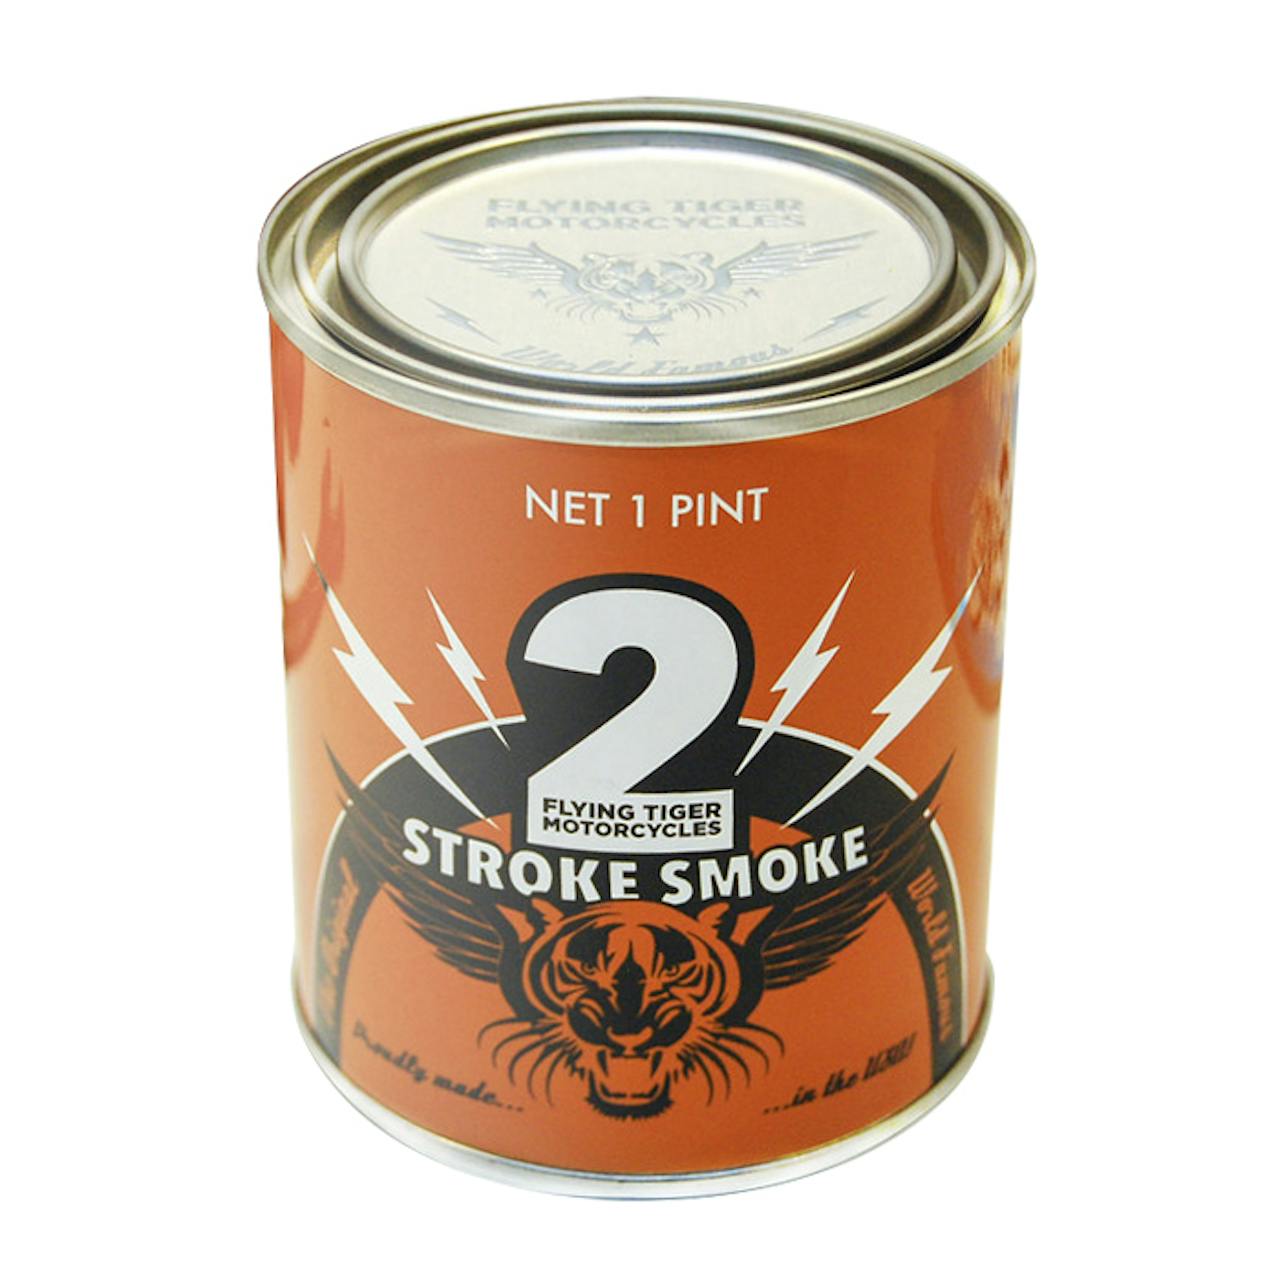 Flying Tiger Motorcycles Two Stroke Smoke Candle